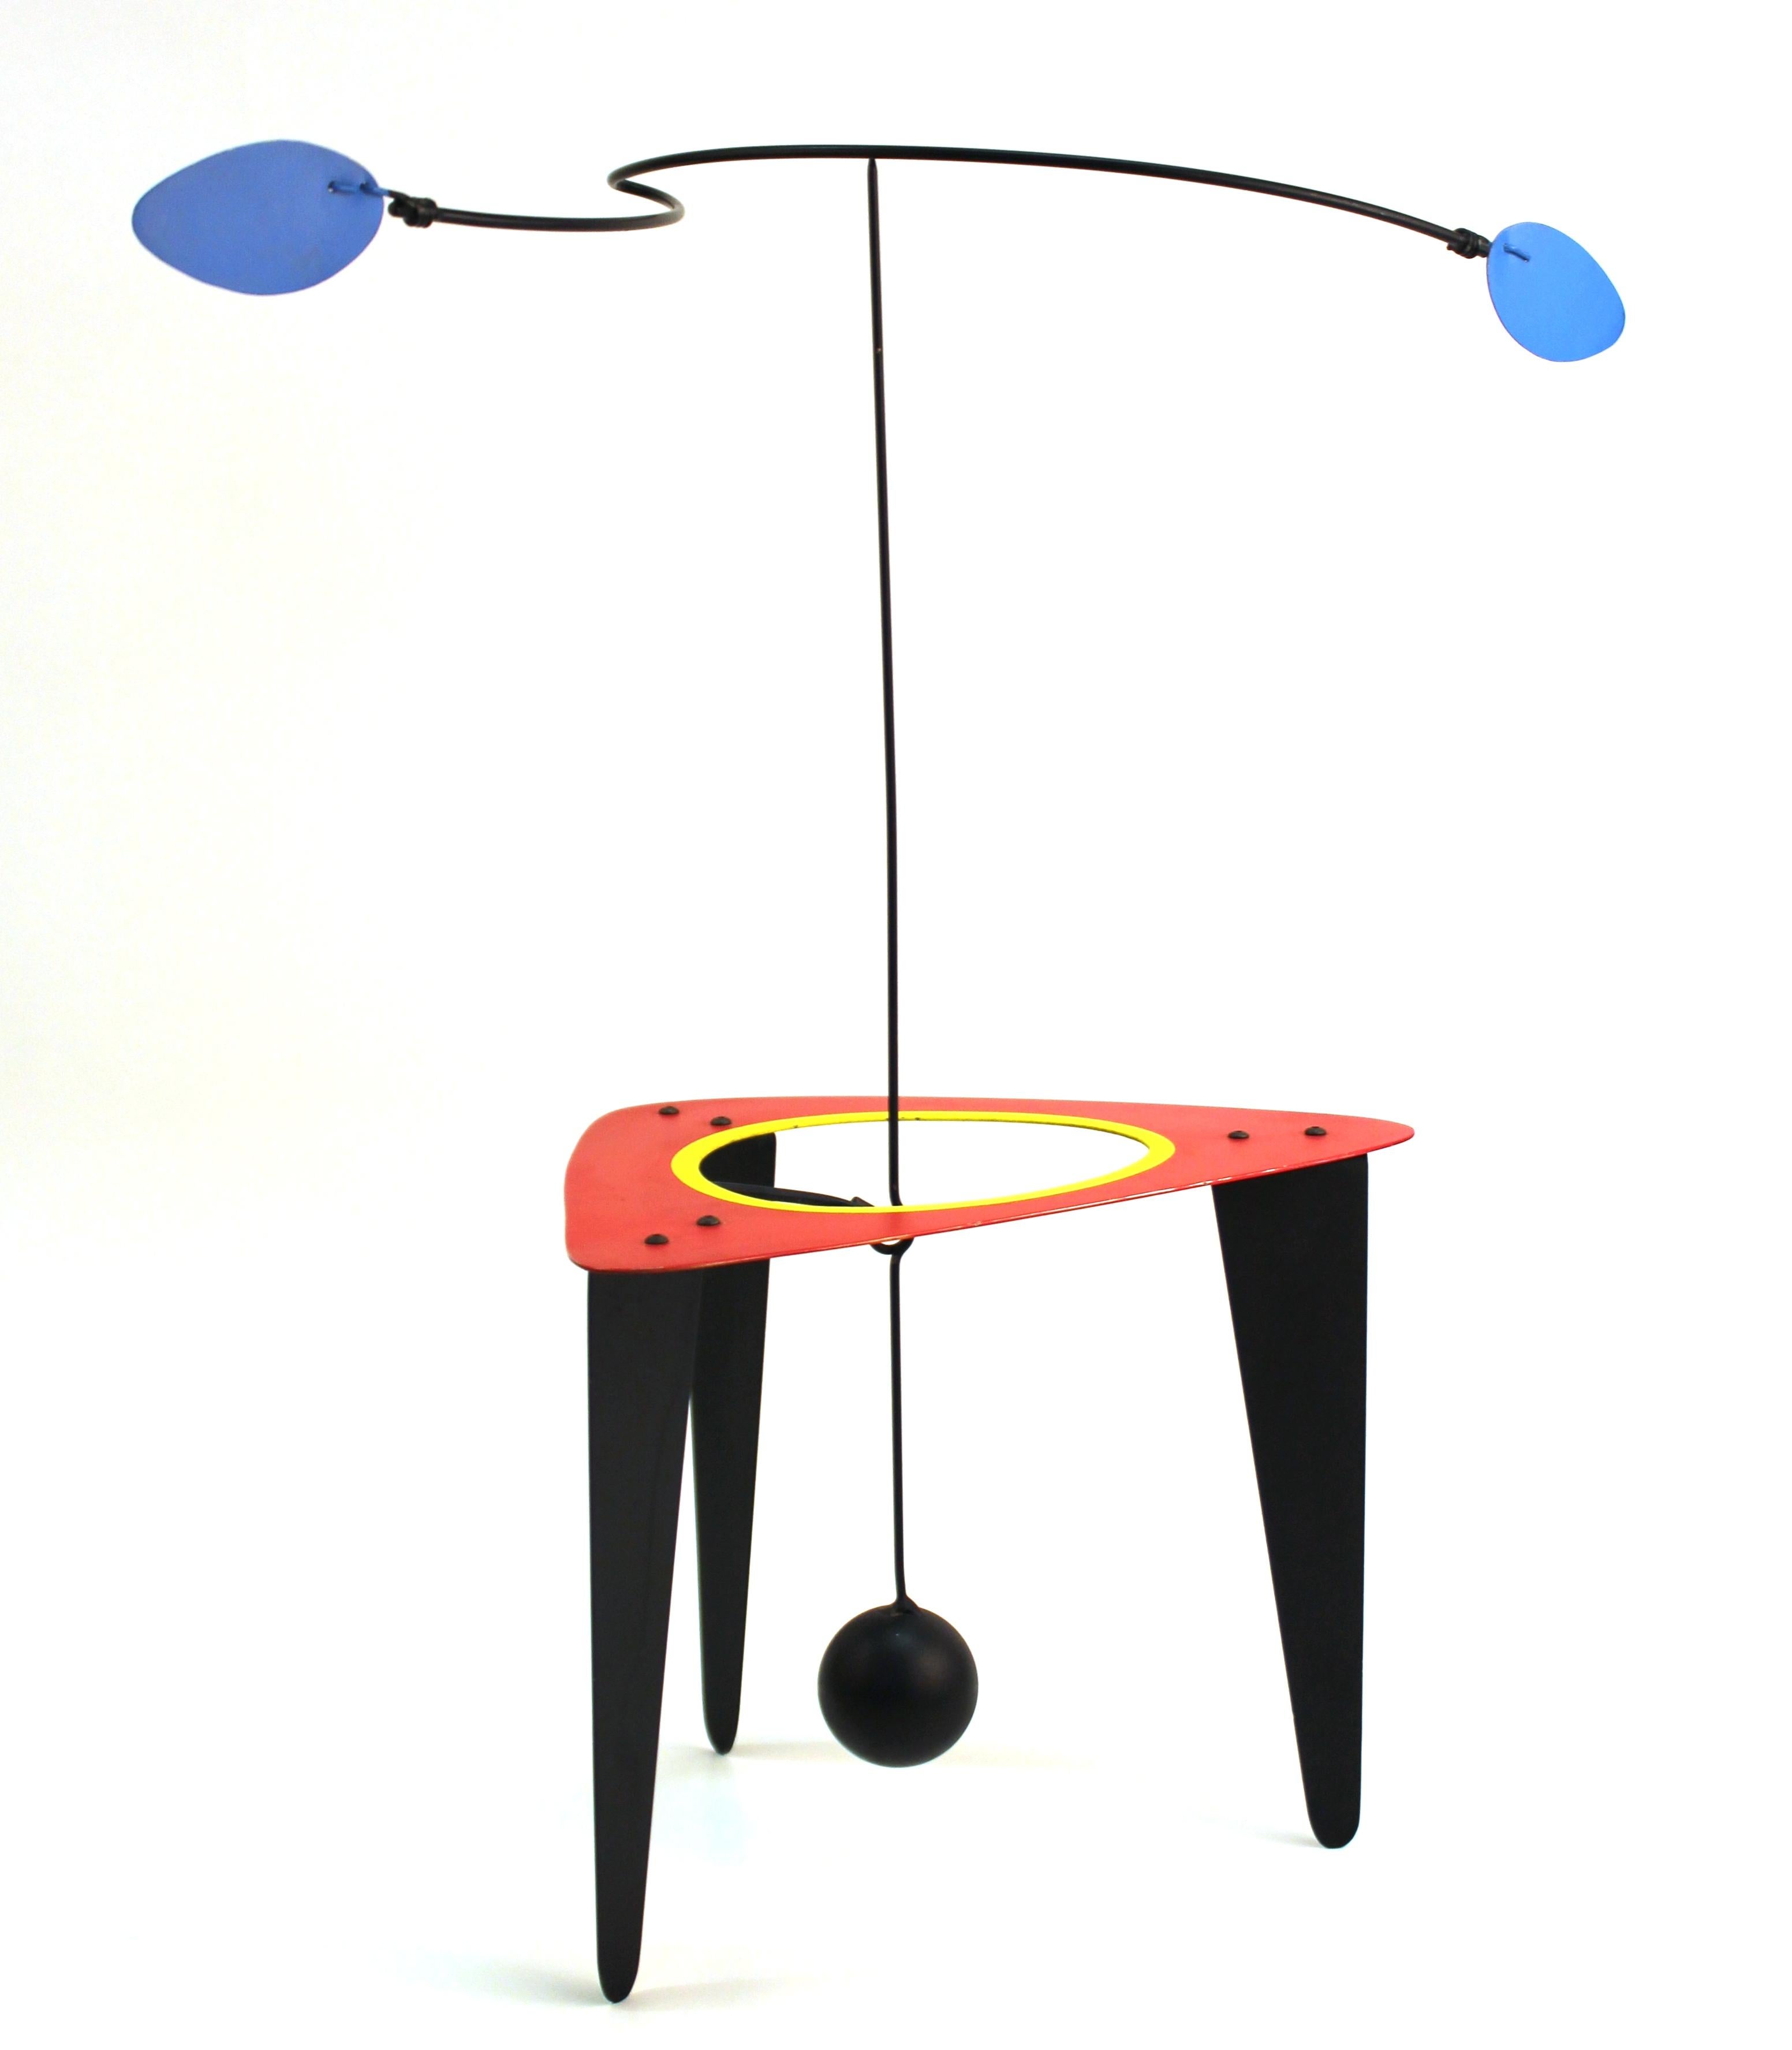 Modern kinetic mobile or stabile tabletop sculpture created by American designer Brad Howe (b. 1959). Signed by the artist on the bottom of the base. The piece was made with painted steel during the 1990s and is in very good vintage condition with